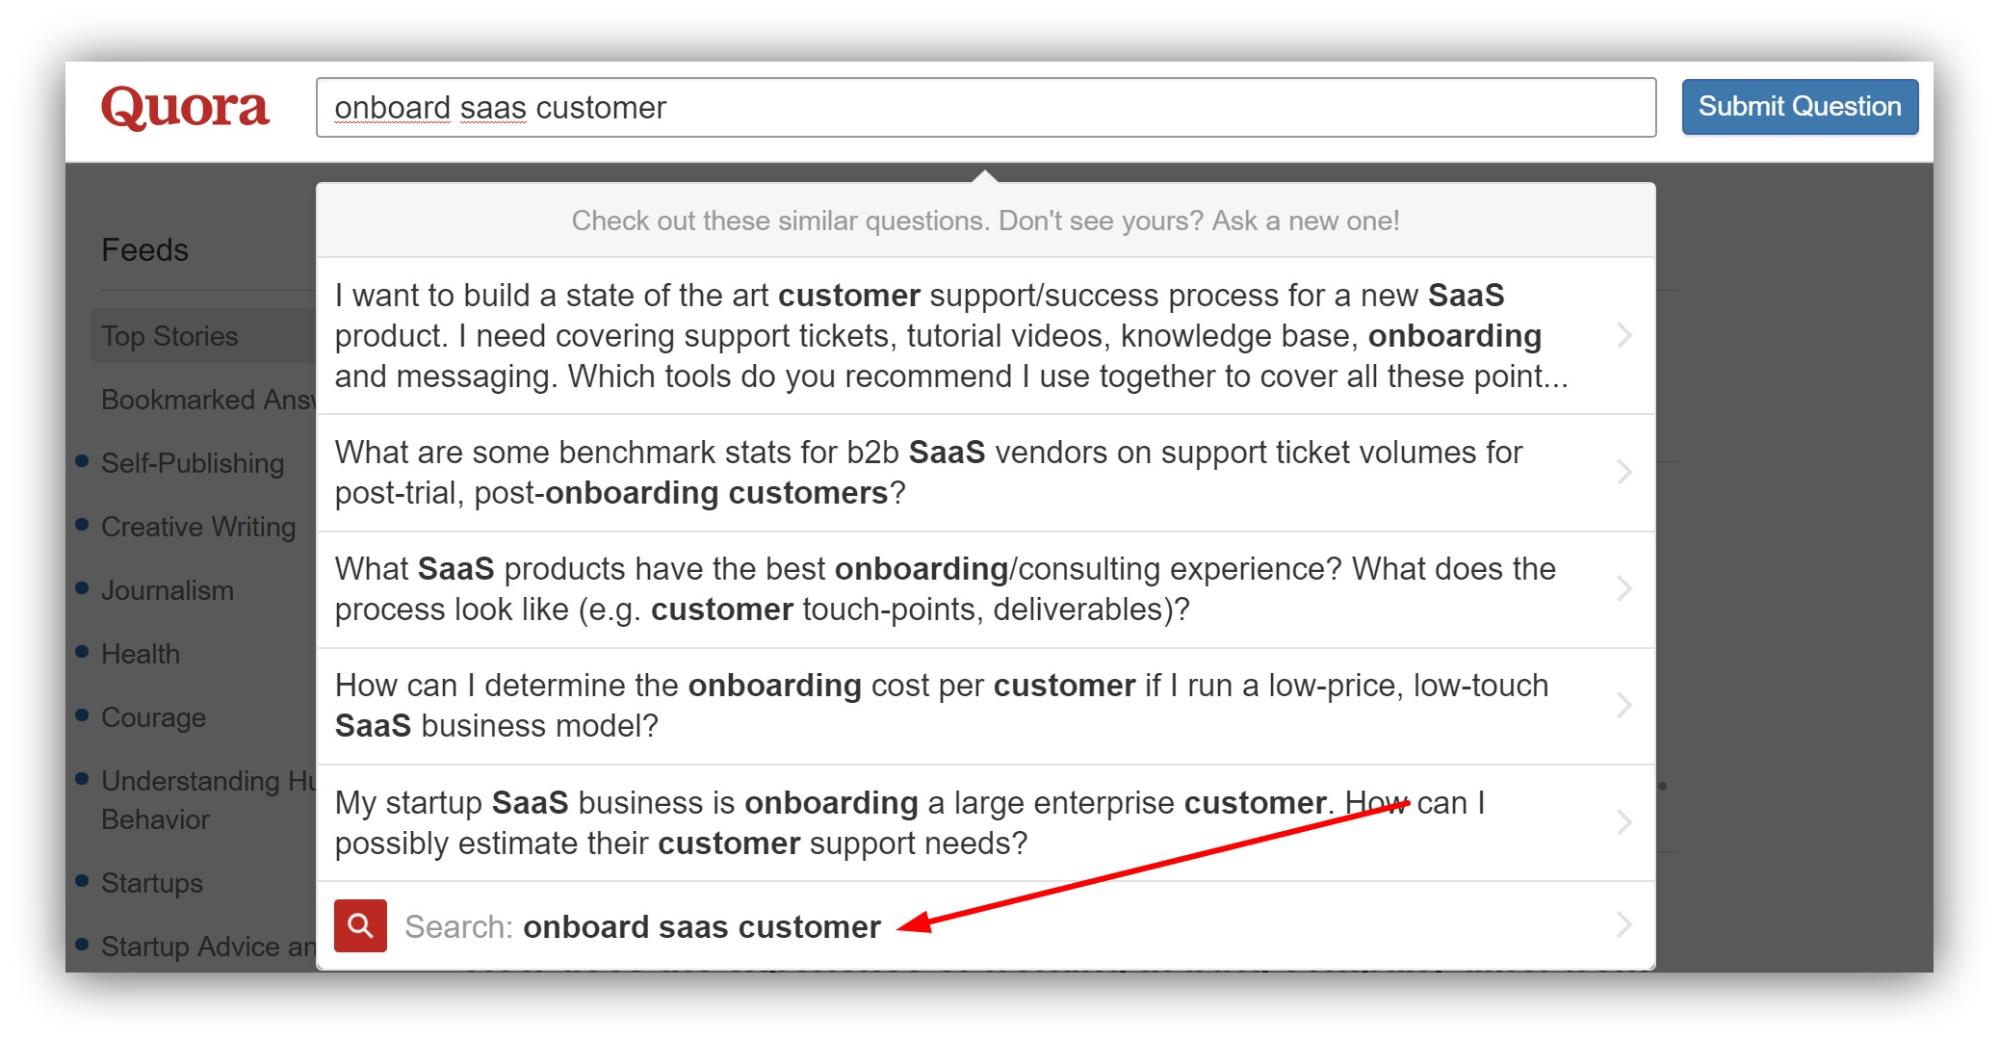 Screenshot showing a quora search for "onboard saas customer"